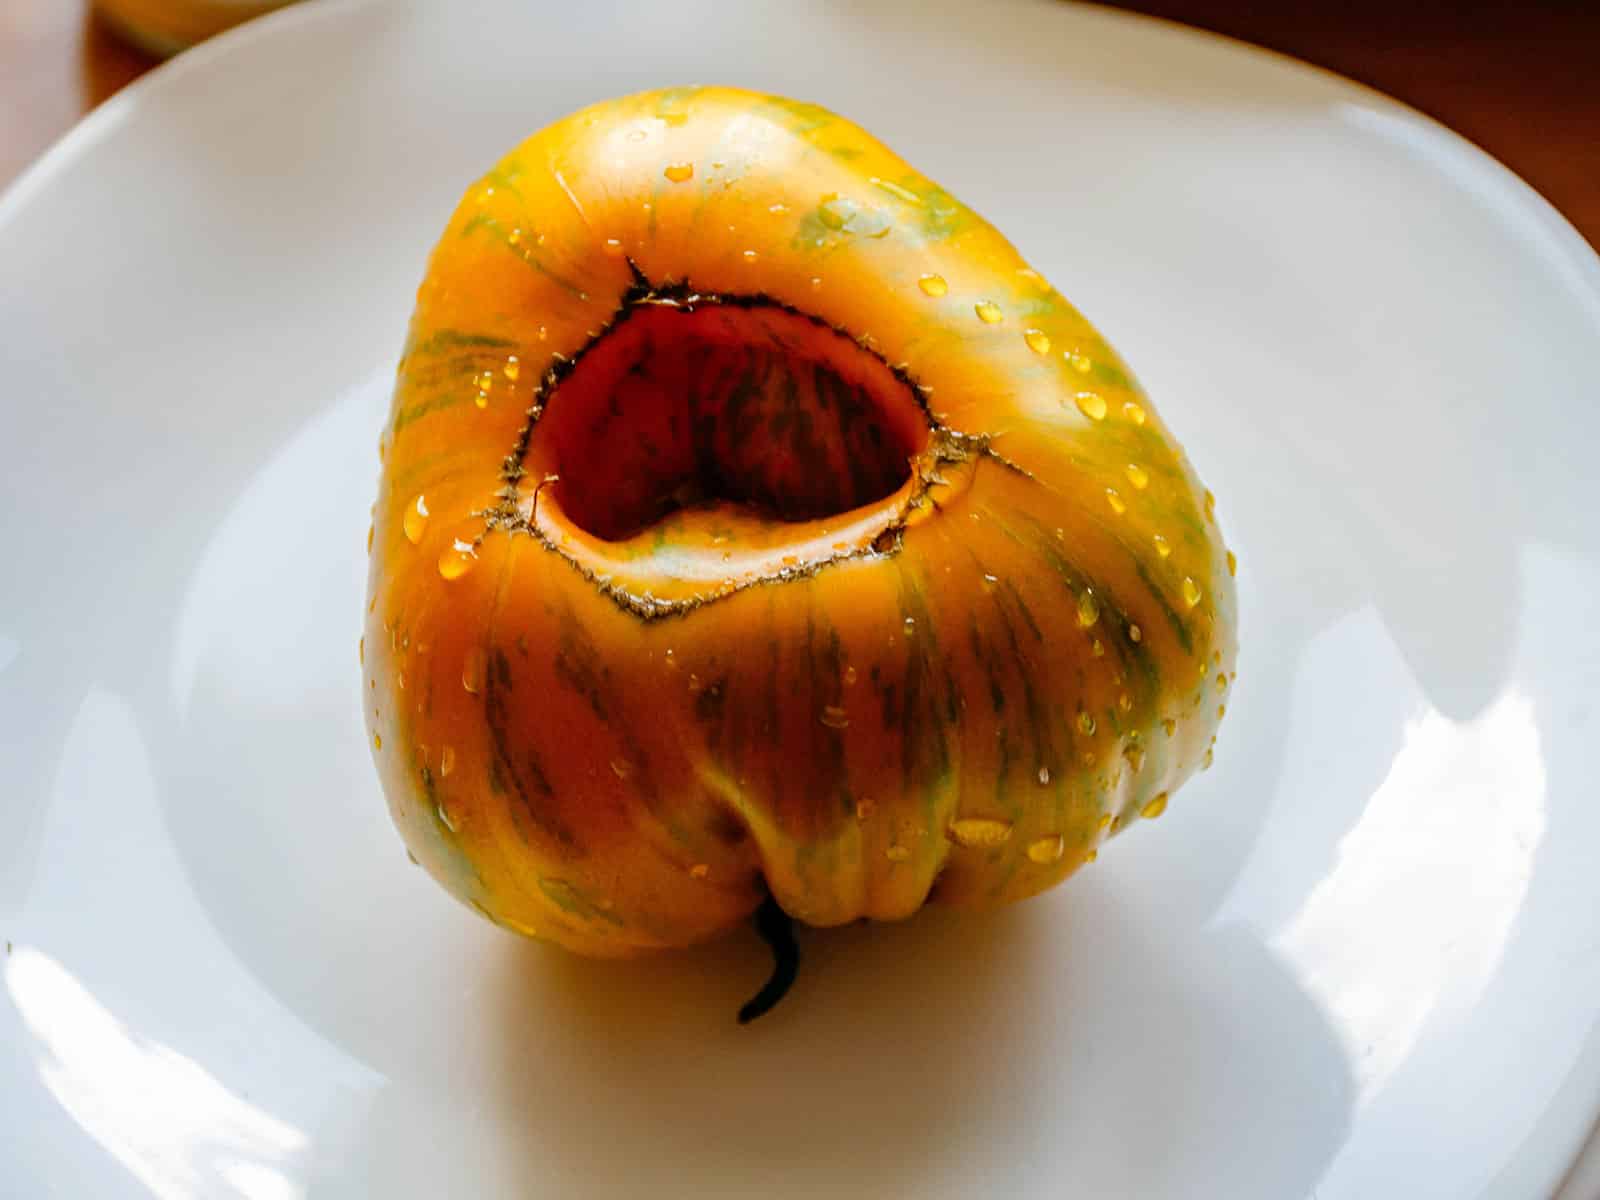 A ripe orange tomato with green stripes on a white plate, with minor catfacing on the bottom of the fruit